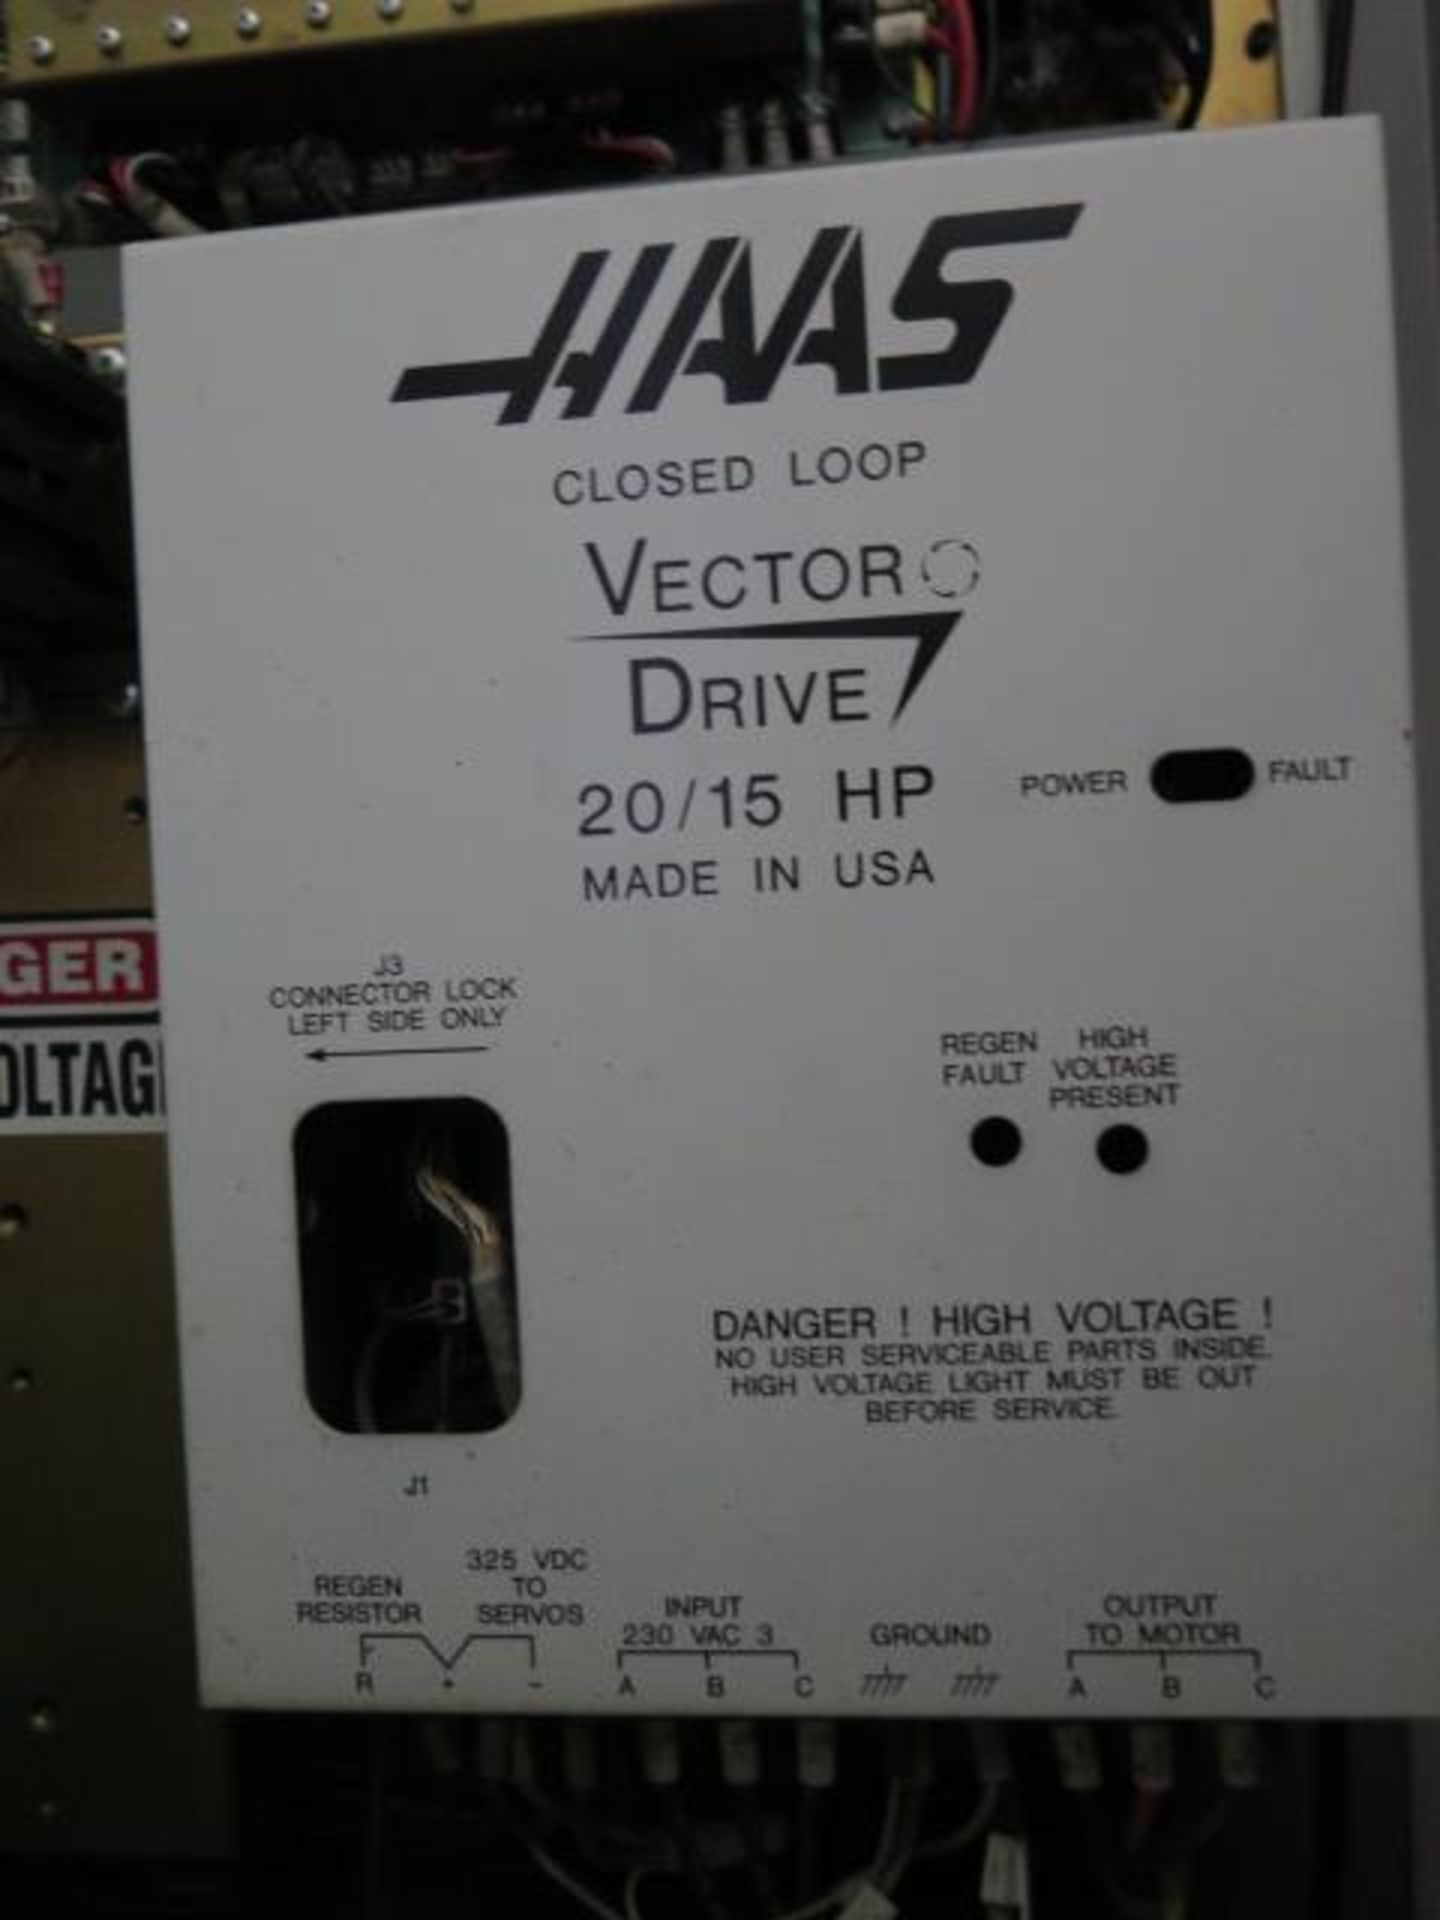 1999 Haas VF-10 4-Axis CNC VMC s/n 18845 w/ Haas Controls, Hand Wheel, 20-ATC, SOLD AS IS - Image 17 of 19